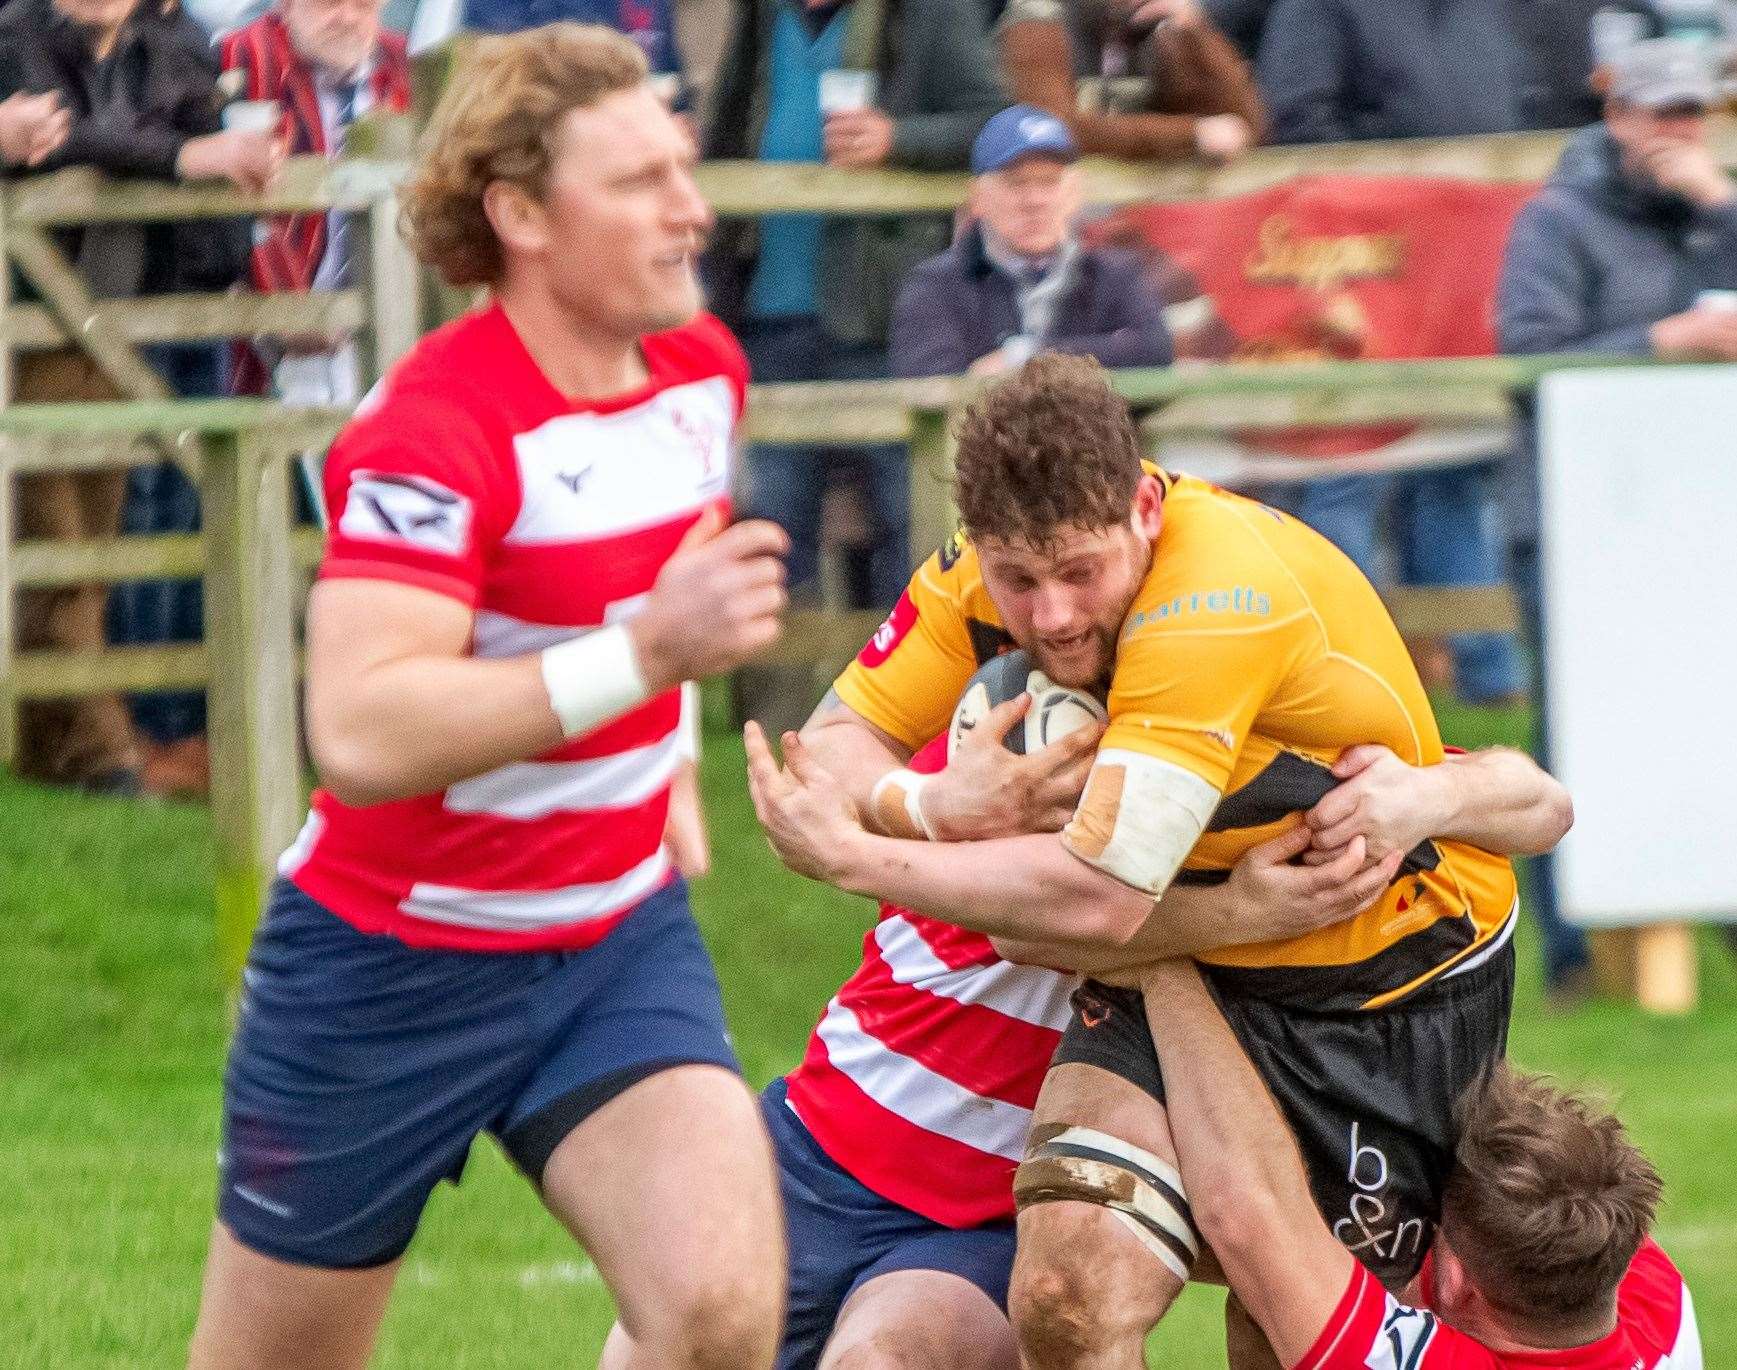 Alex Evans in the thick of the action for Canterbury in their weekend loss at Dorking. Picture: Phillipa Hilton